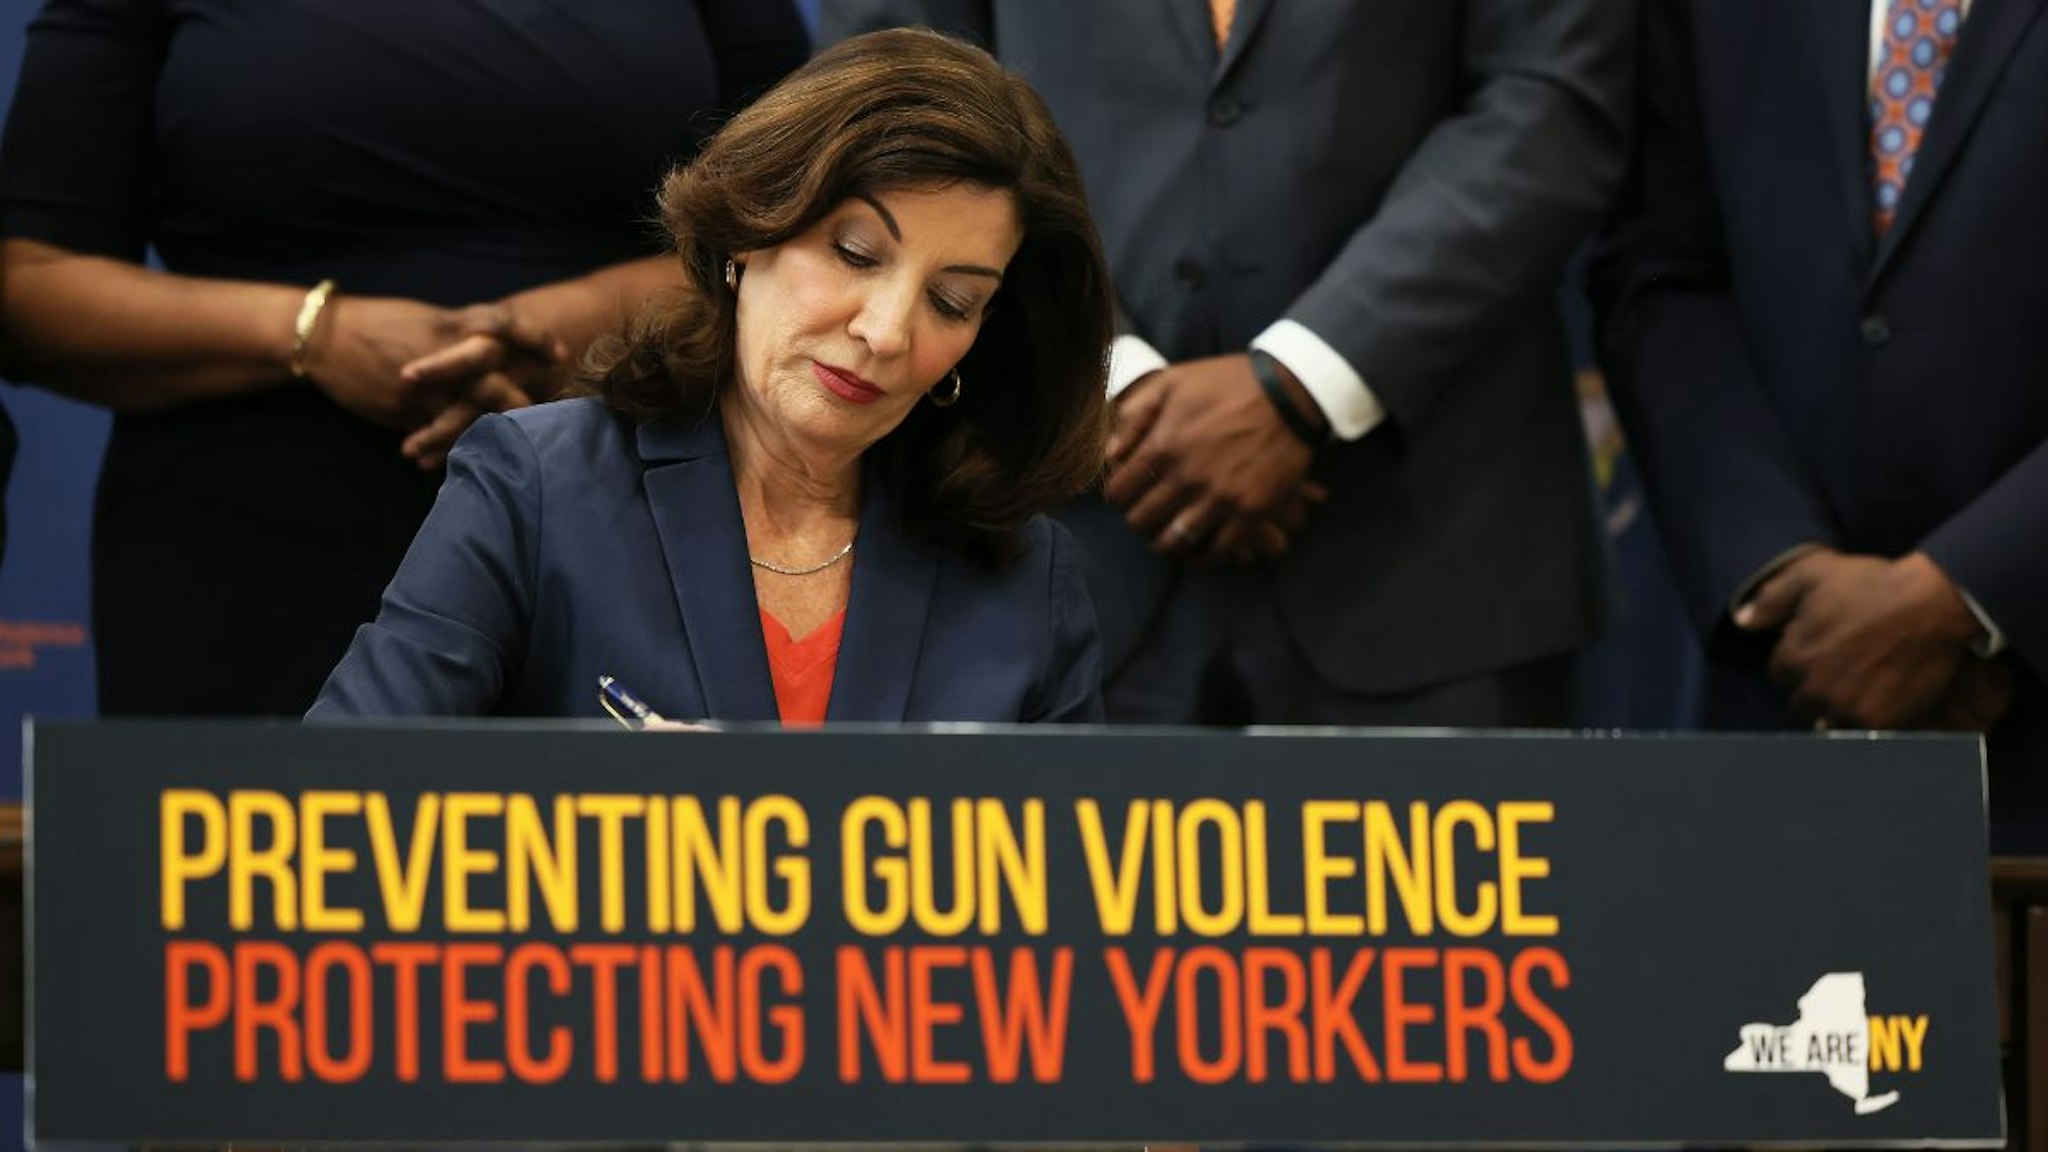 Gov. Kathy Hochul signs legislation as she is surrounded by lawmakers during a bill signing ceremony at the Northeast Bronx YMCA on June 06, 2022 in New York City.